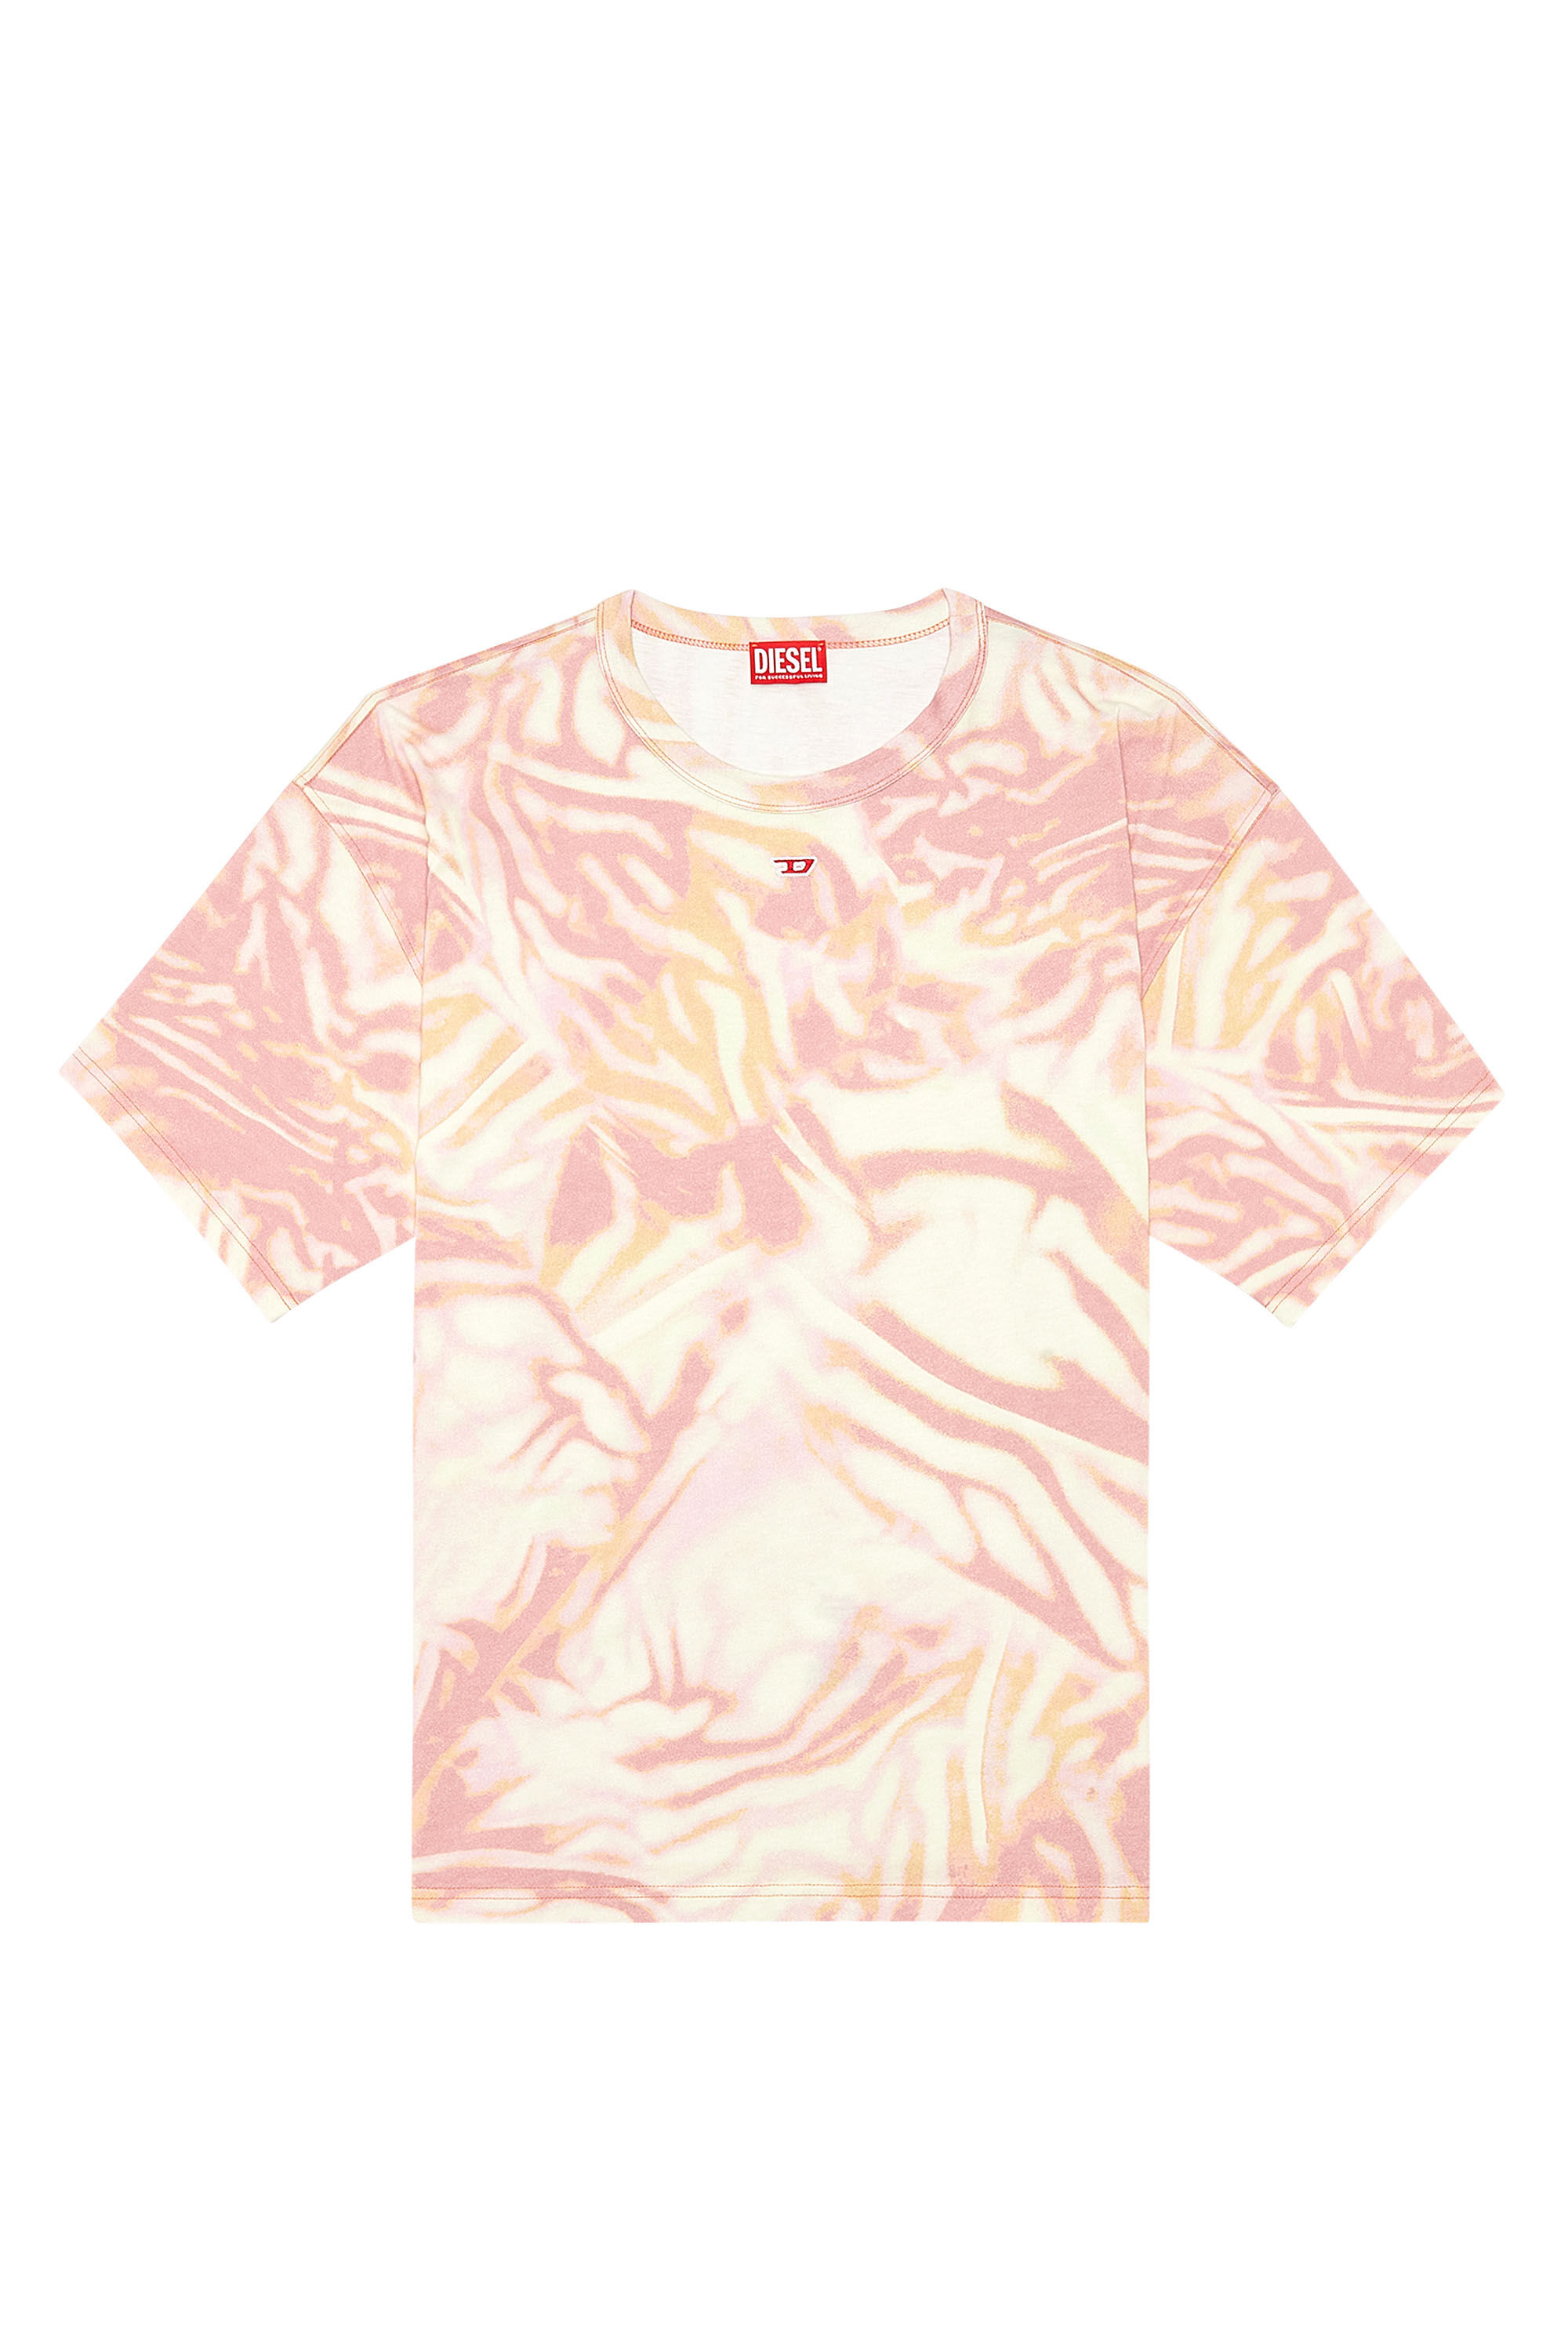 Diesel - T-BOXT-N3, Man T-shirt with zebra-camo print in Pink - Image 3